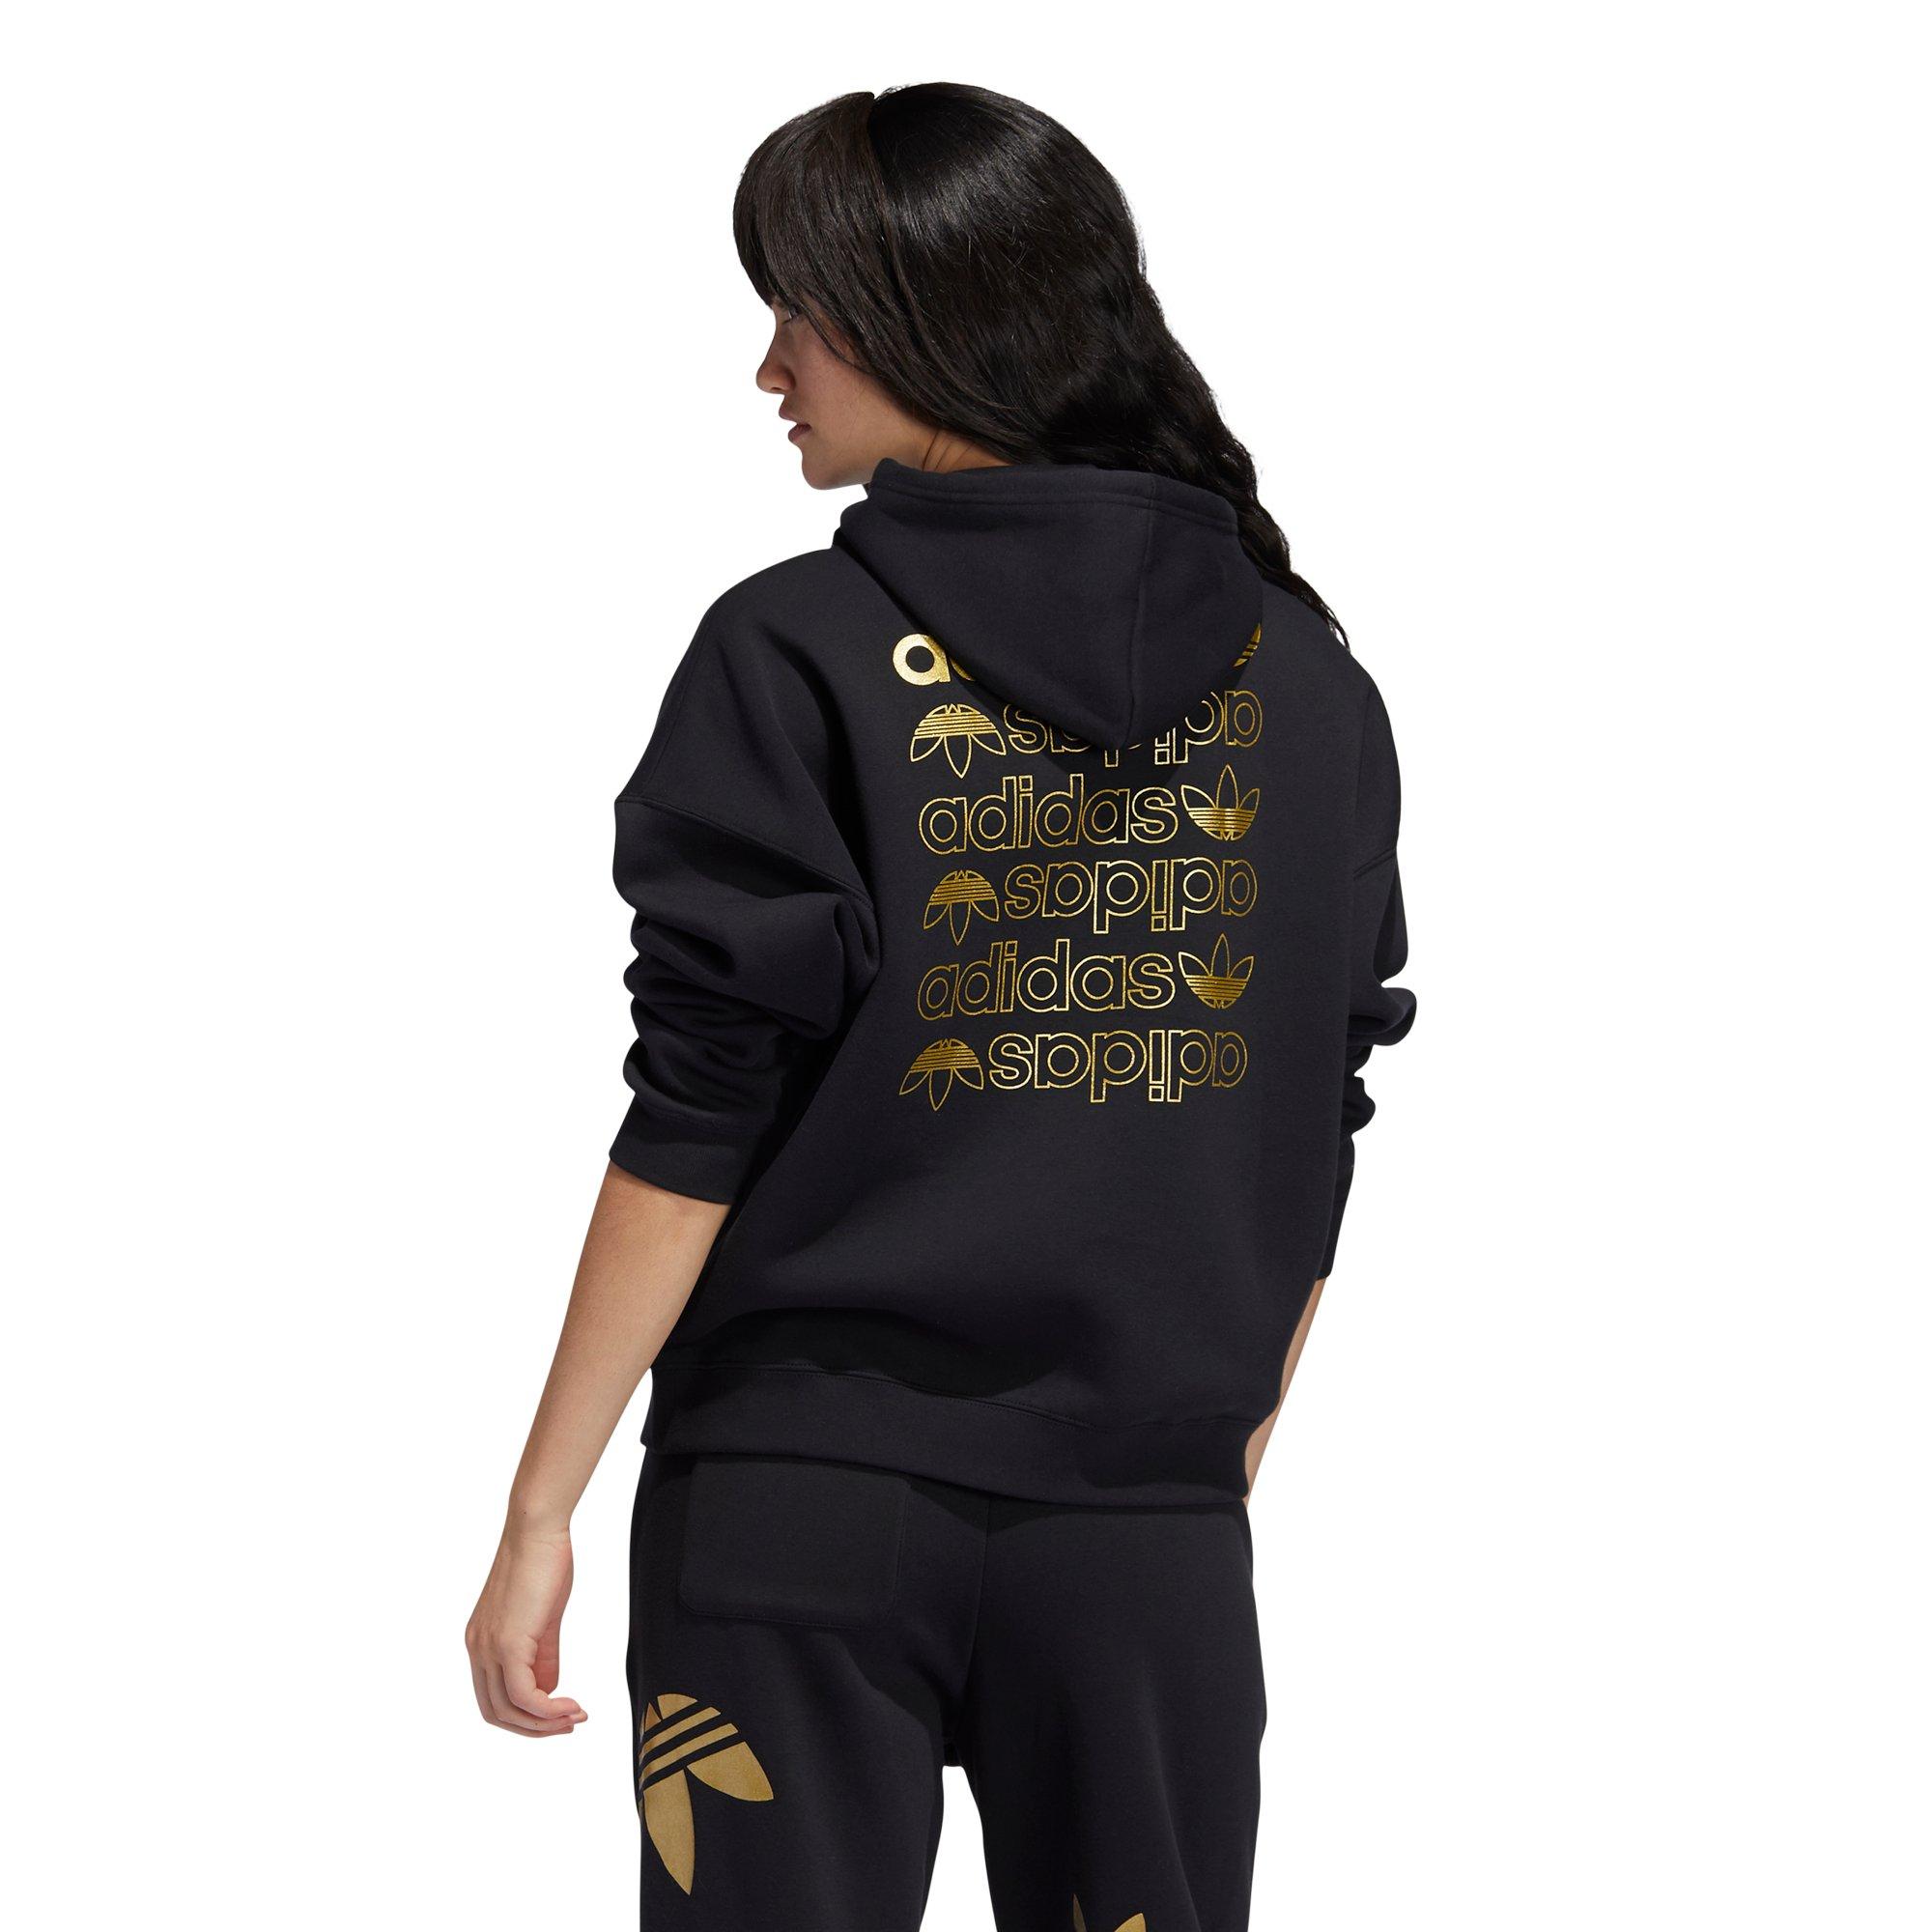 black and gold adidas sweater